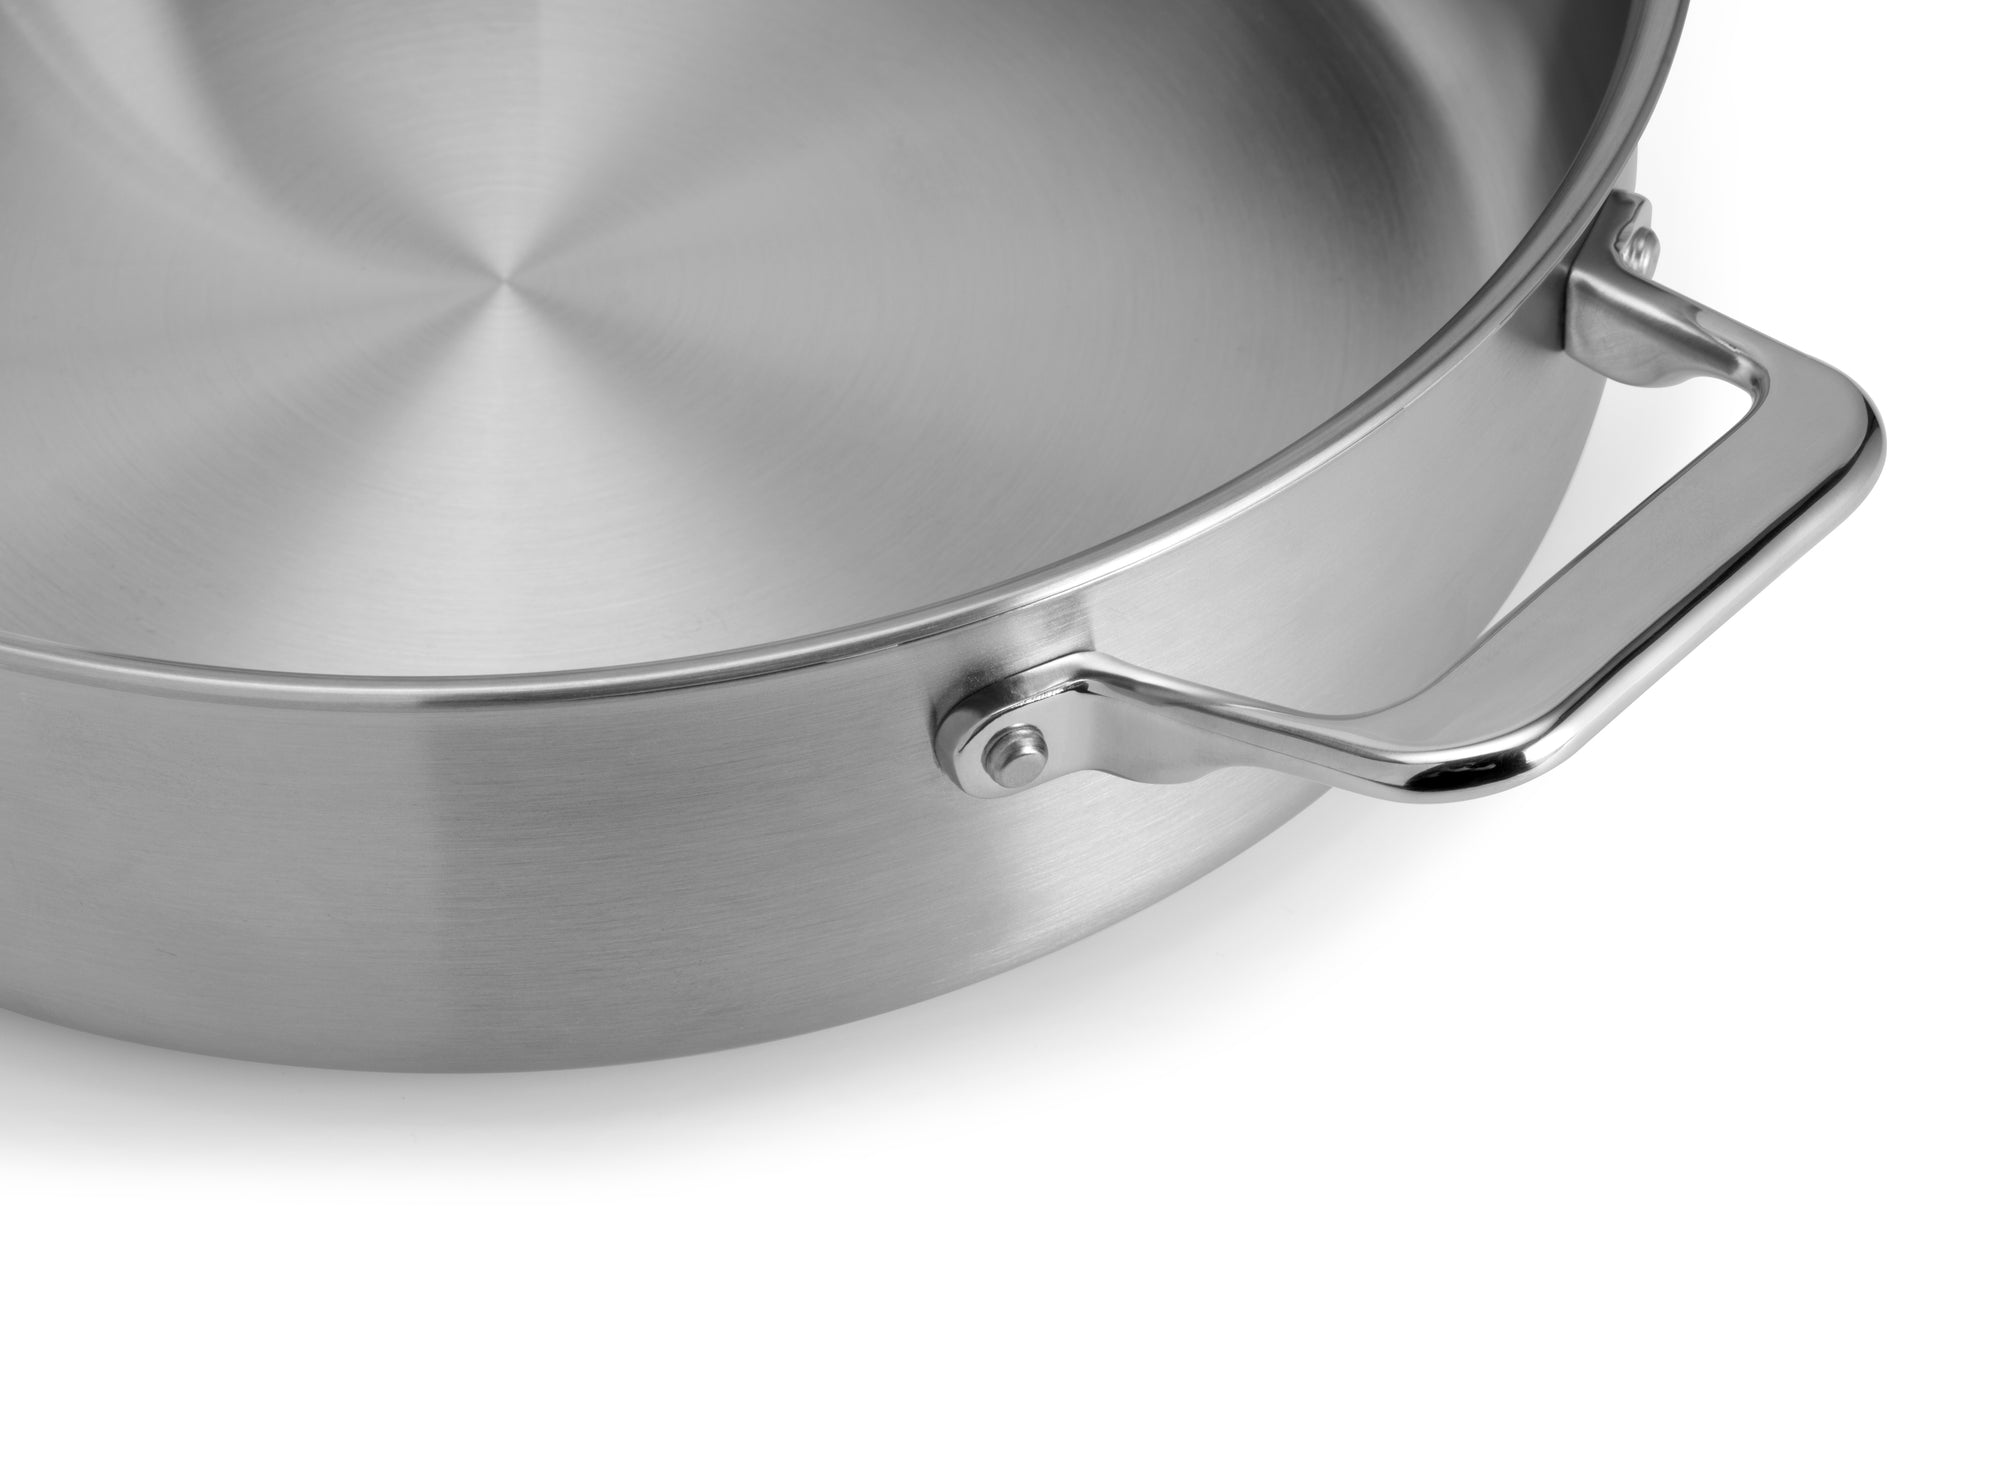 {{3-qt}} The Misen 3QT Saute features an additional helper handle that makes this pan even easier to move around.